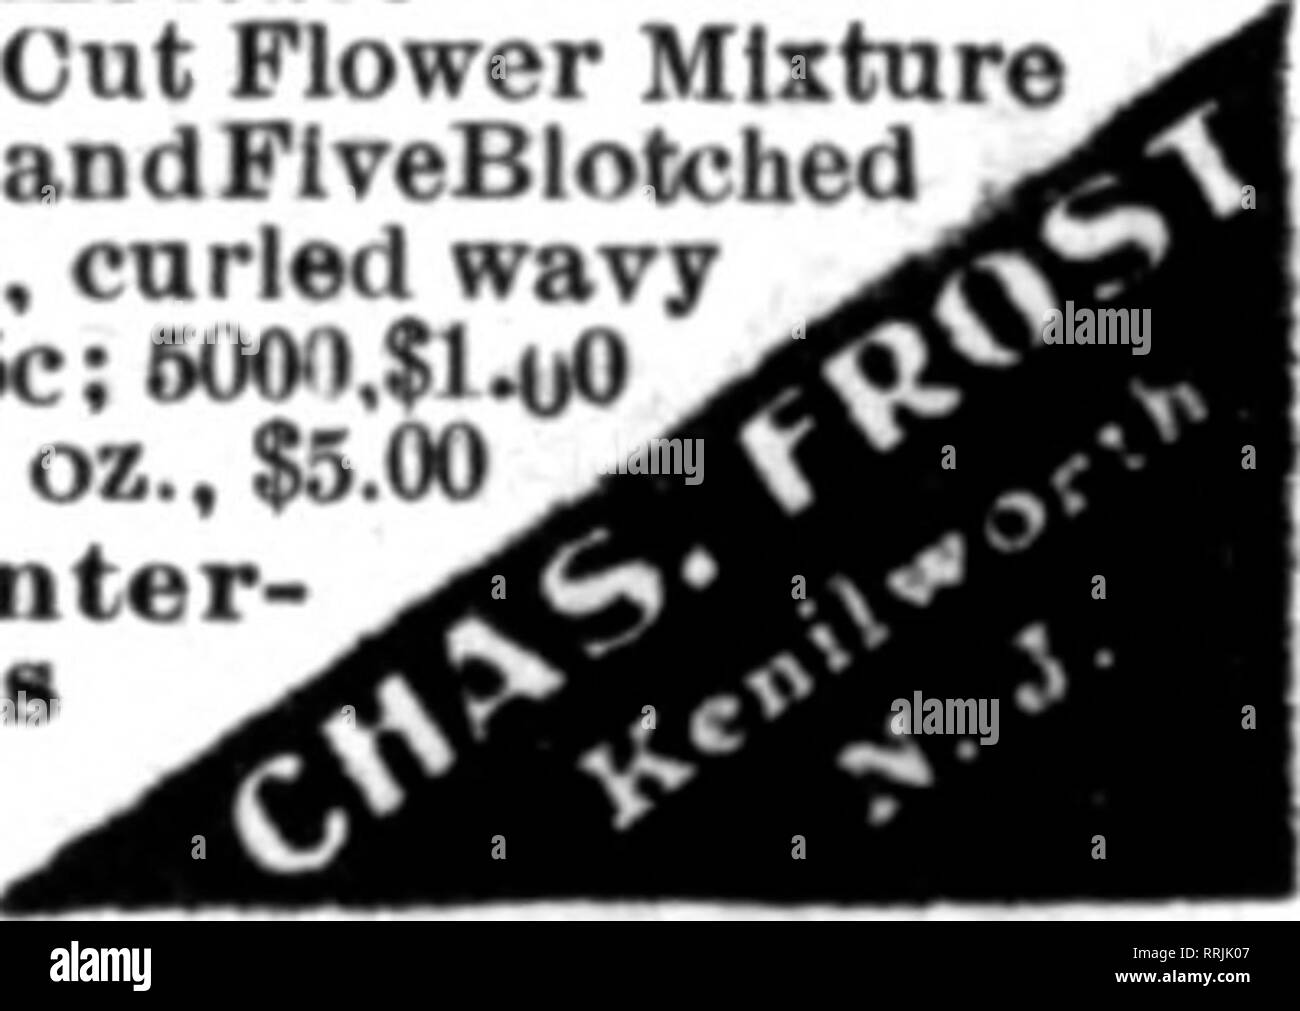 . Florists' review [microform]. Floriculture. HELLERS MICE PROOF SEED CASES. Send for CaUlogue. HELLER &amp; CO. Montpelier, Ohio CARTER'S TESTED SEEDS, Inc. JAMES FISHER. Western Representative Room 519.180 N. Dearborn St, CHICAGO, ILL ±|lllllllllllllllllllllllllllllllllllilllllllllllllllllllllllllllllllllllllllllllllllllllllllllllllll|||||u I FLOWER SEEDS[ Tr.pkt. Oz. Bellis Perennis Longf3llow. rose ..$0.iO $1.50 Bellis Perennis Snowball 40 1.50 Cineraria, semi-dwarf, giant prize strain 60 Schizanthus, er.-fl. hybrid, mixed .10 .25 Tr.pkt. Oz. = Pansy, Nonpareil, finest Quality, Z mixed $6. Stock Photo